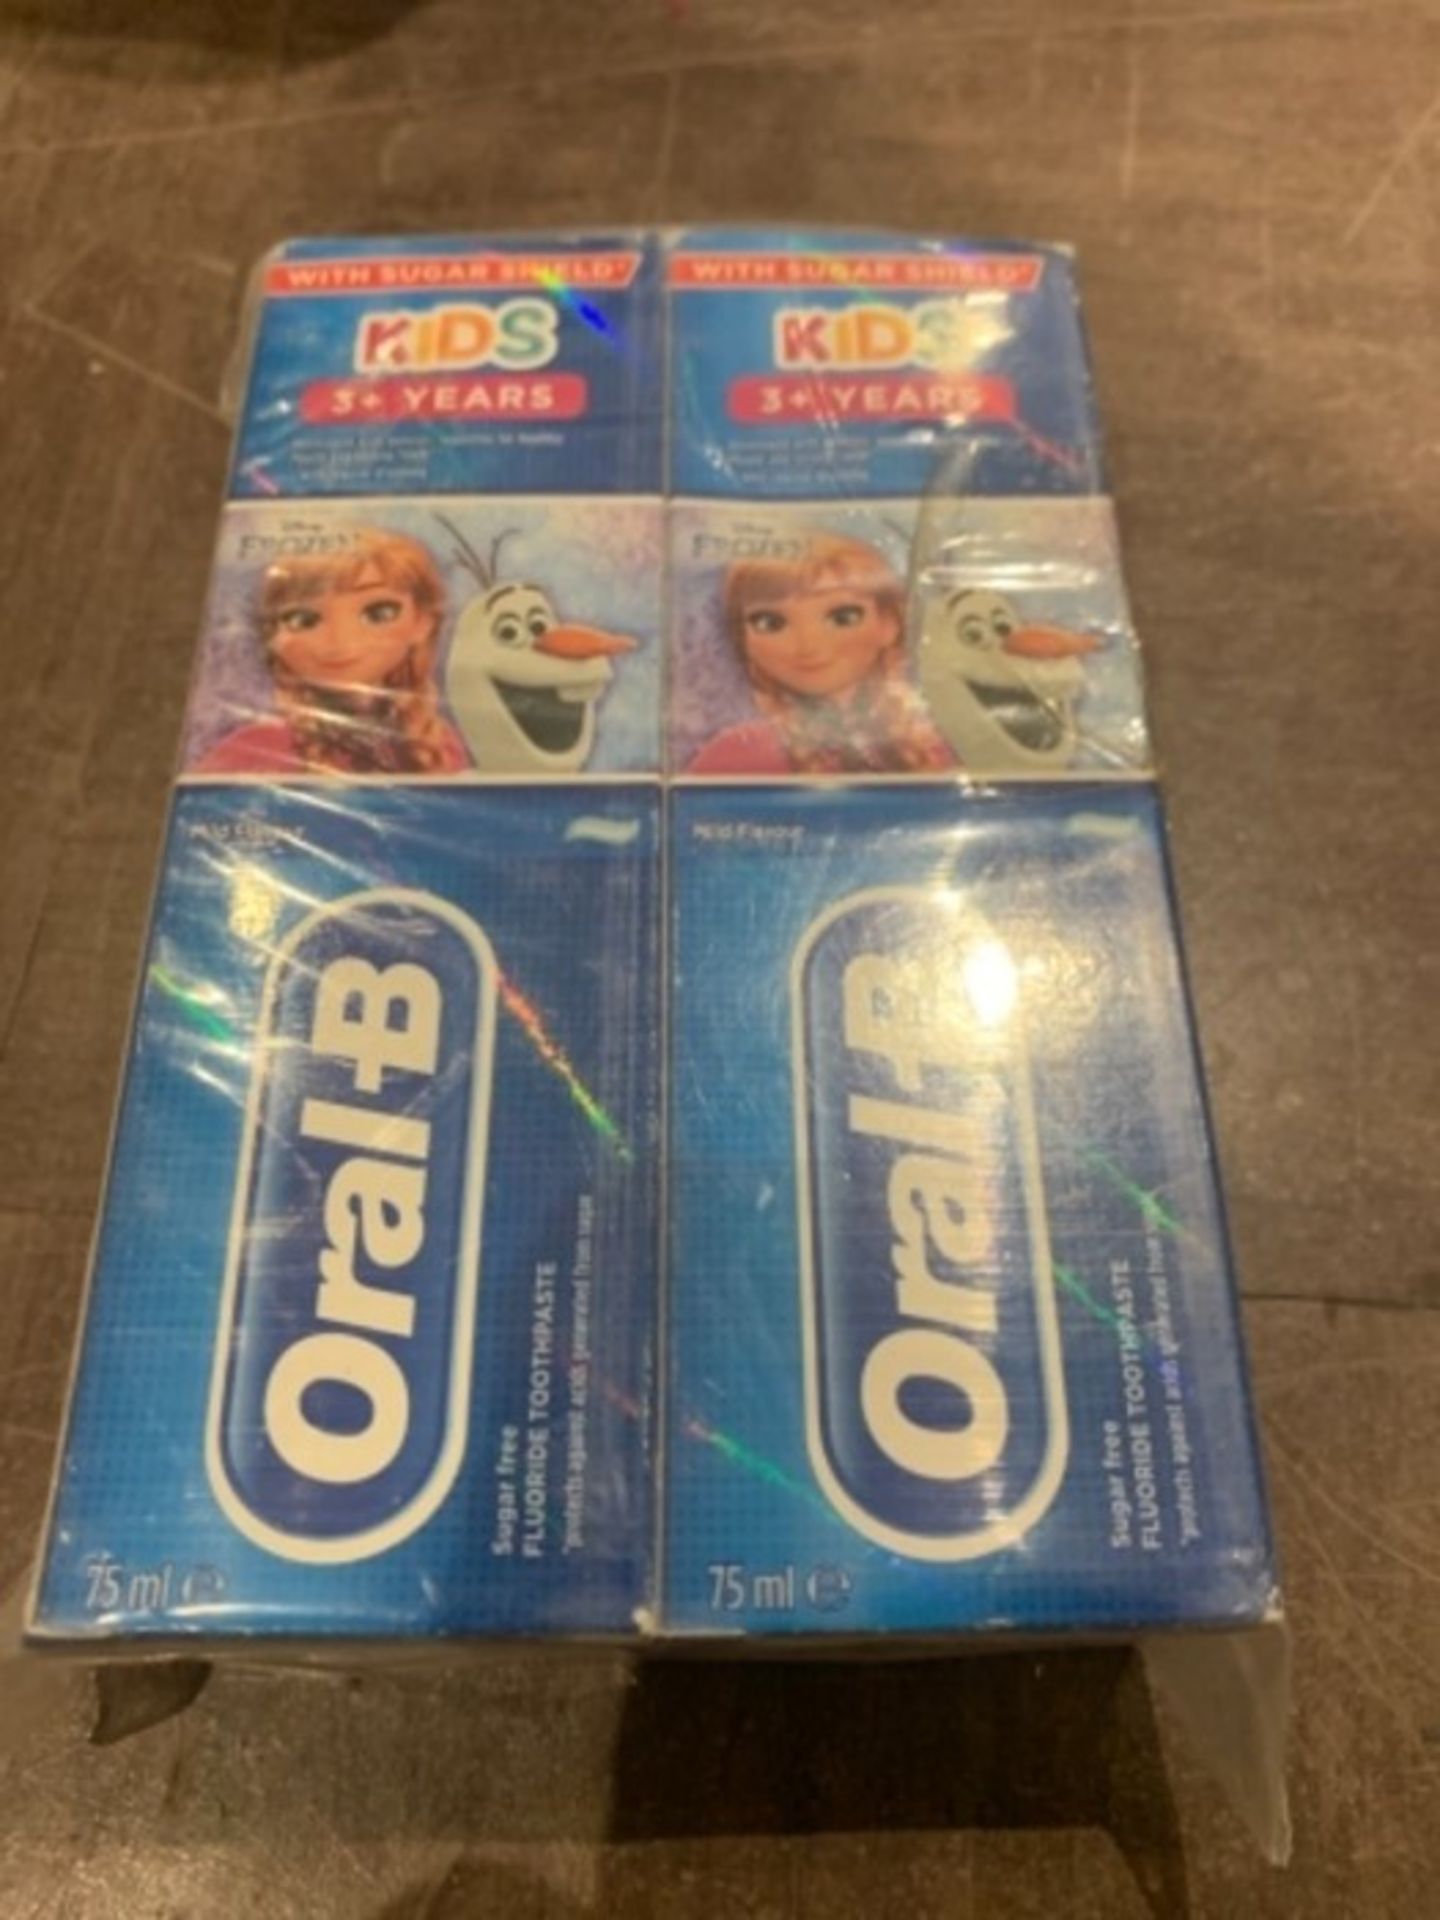 Oral-B Disney Frozen Pro-Expert Stages Kids Toothpaste 75 ml X 2 - Image 2 of 4